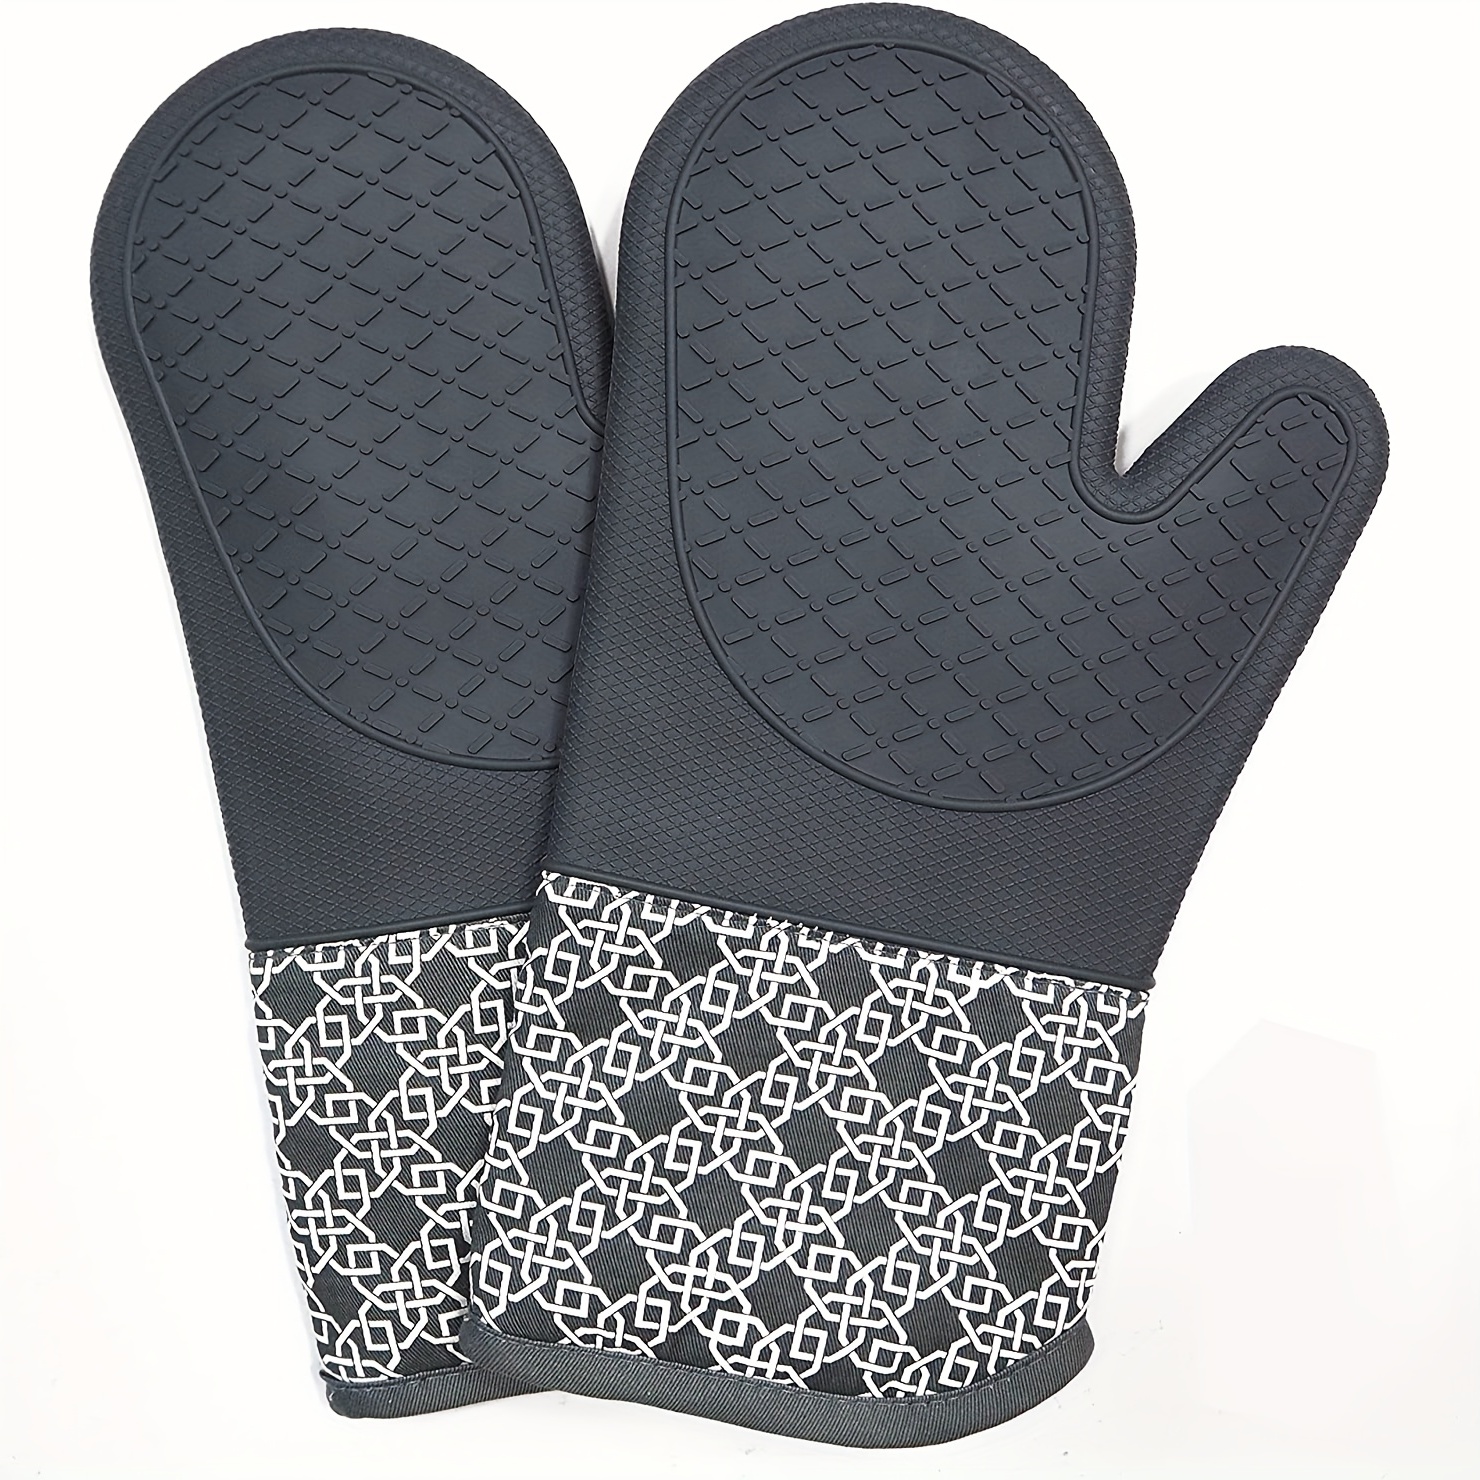 Heat-Resistant Silicone Oven Mitts with Cotton Lining - Set of 2